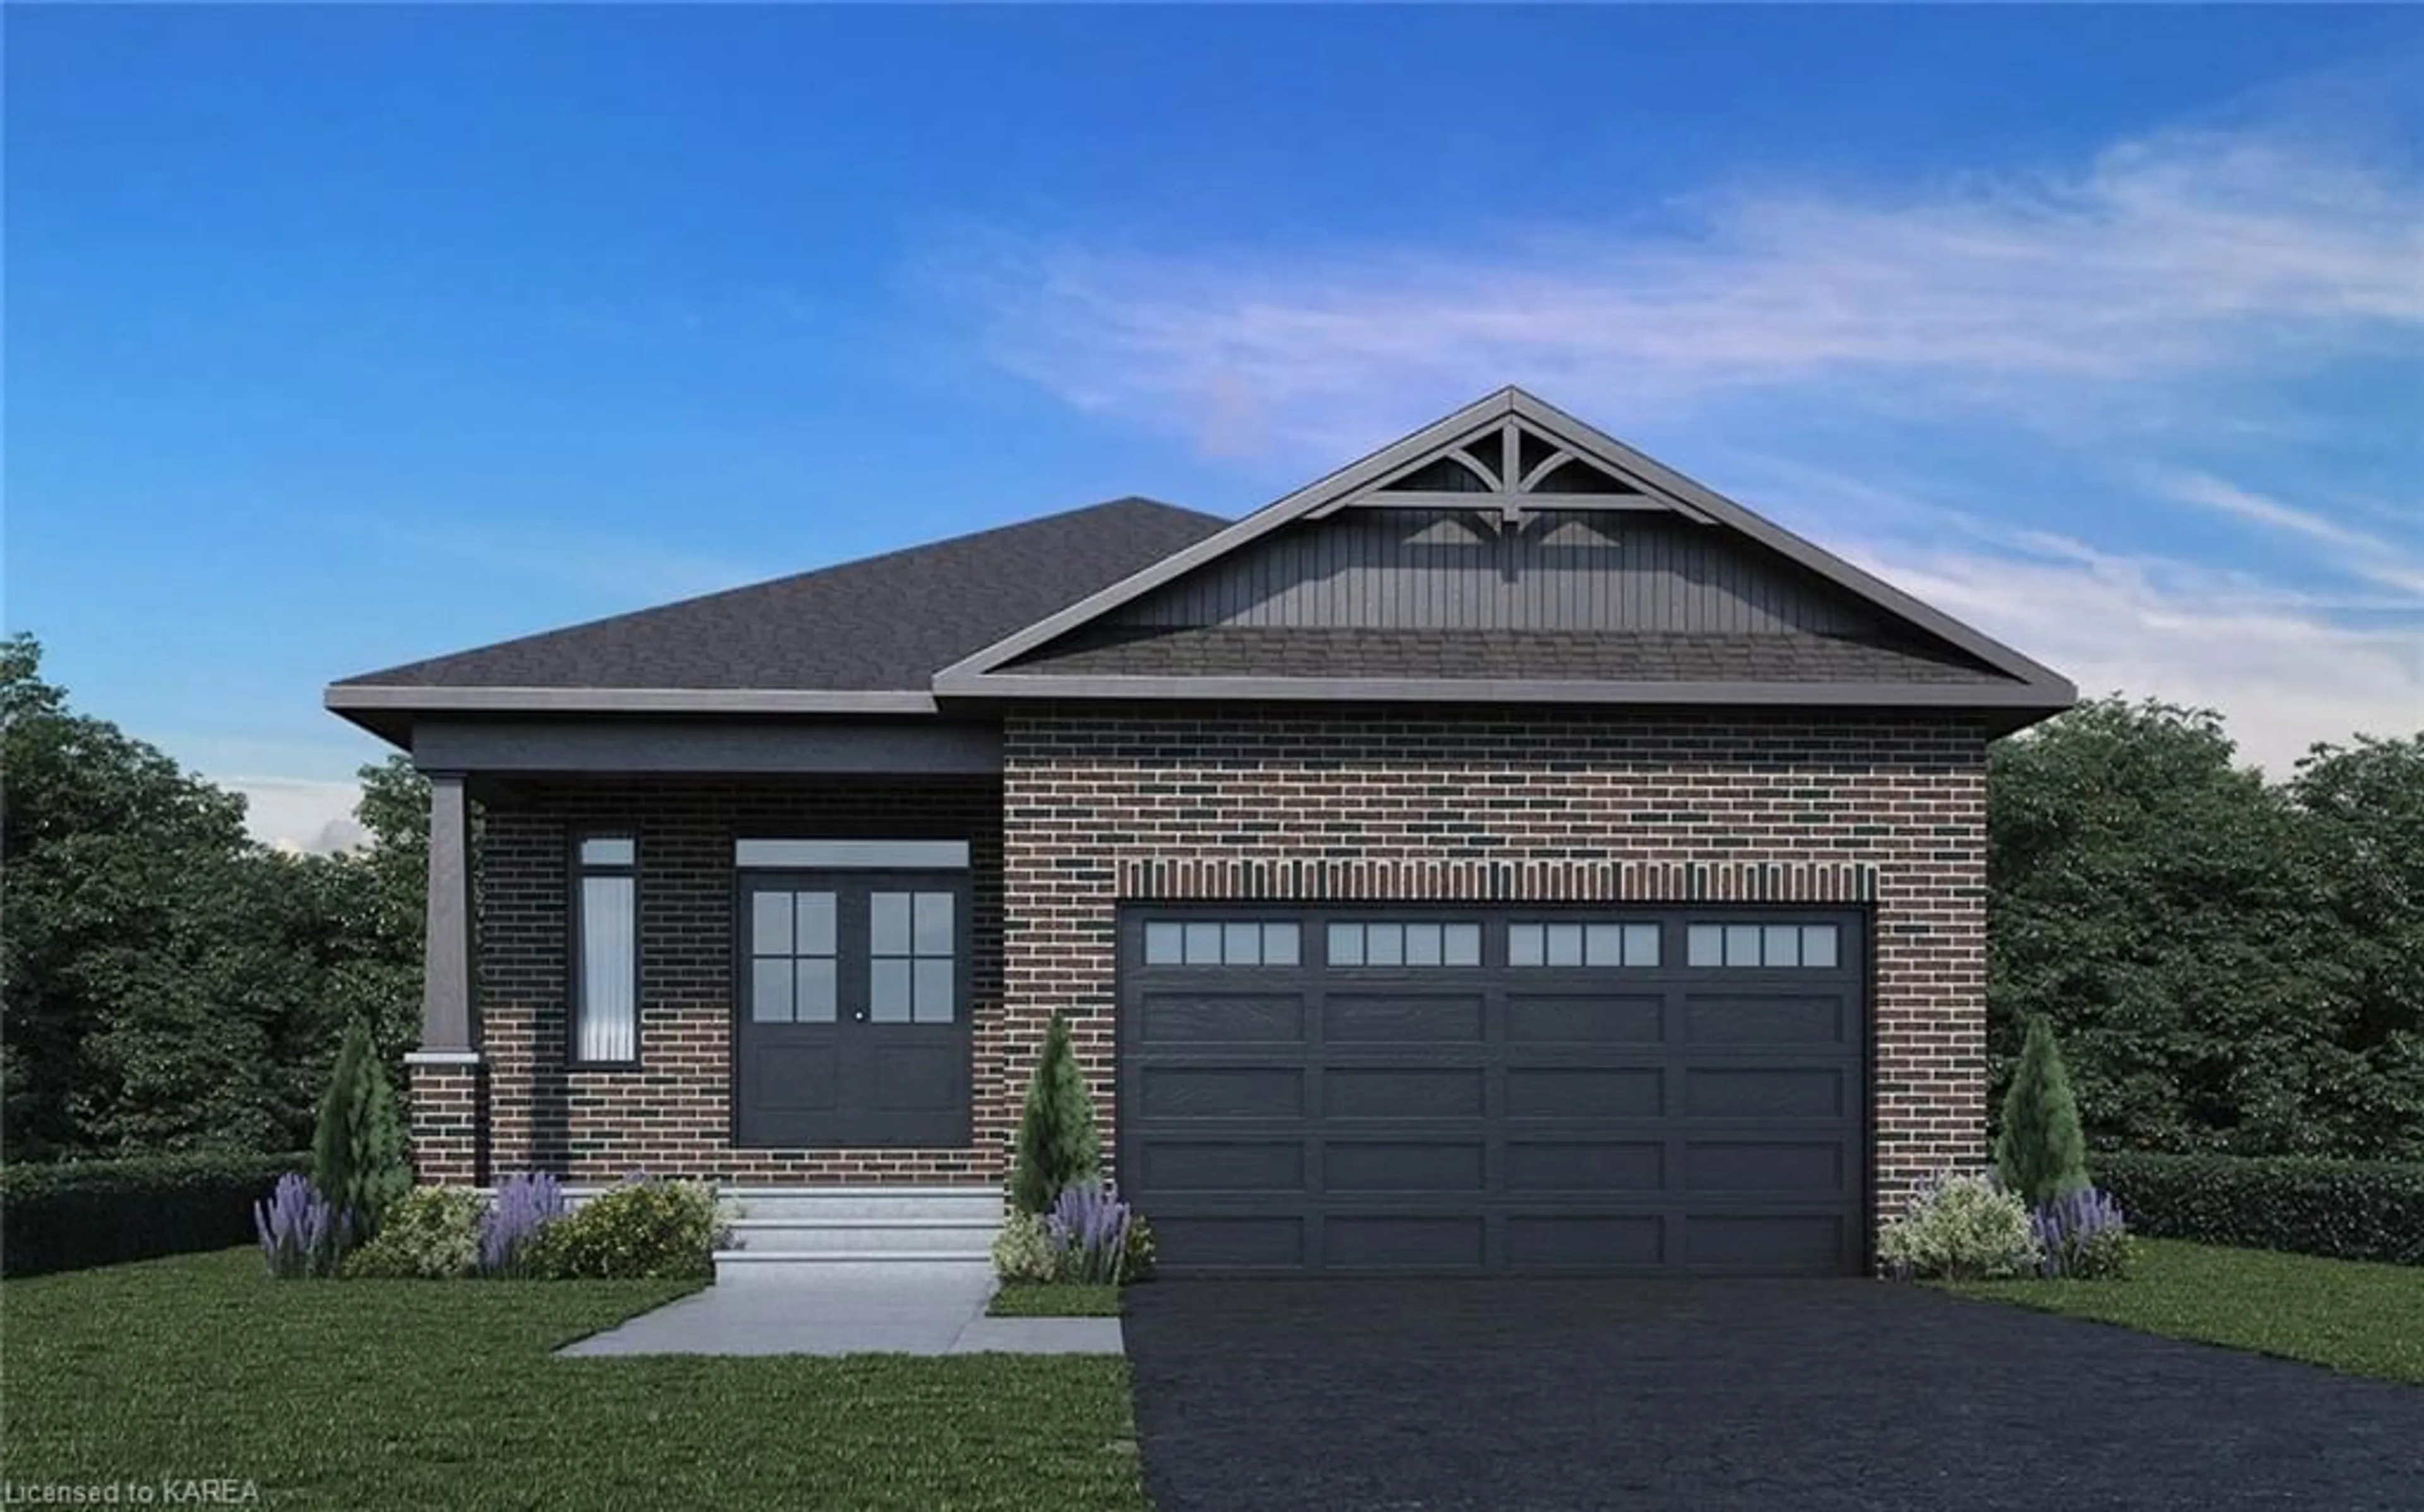 Home with brick exterior material for 2722 Delmar St, Kingston Ontario K7P 0J1